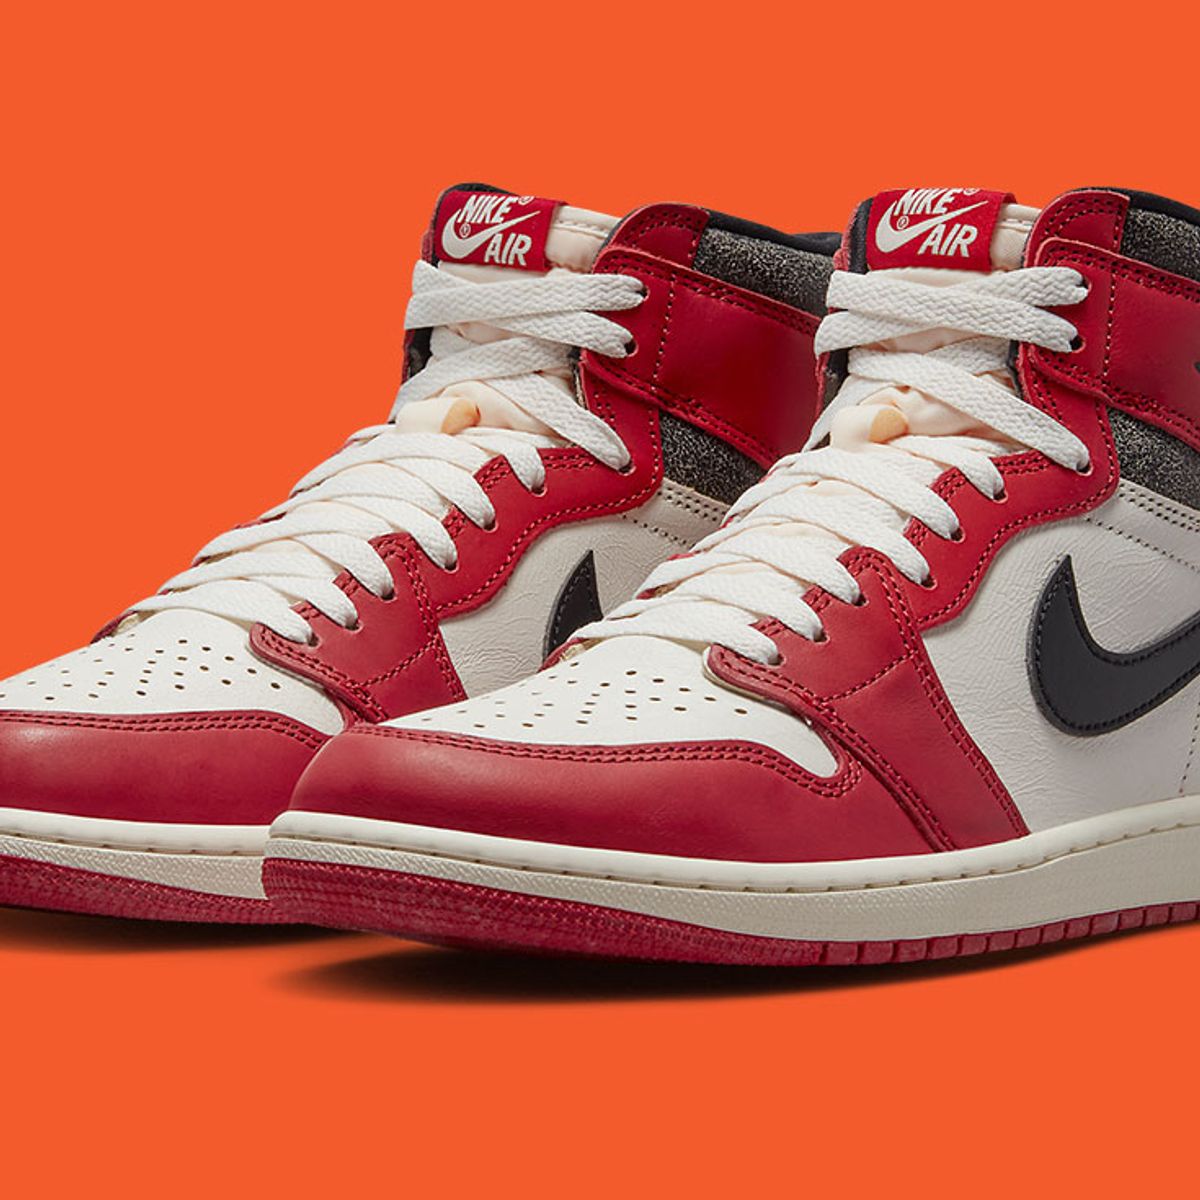 Jordan 1 Retro High OG Chicago Reimagined Lost & Found 2022 for Sale, Authenticity Guaranteed